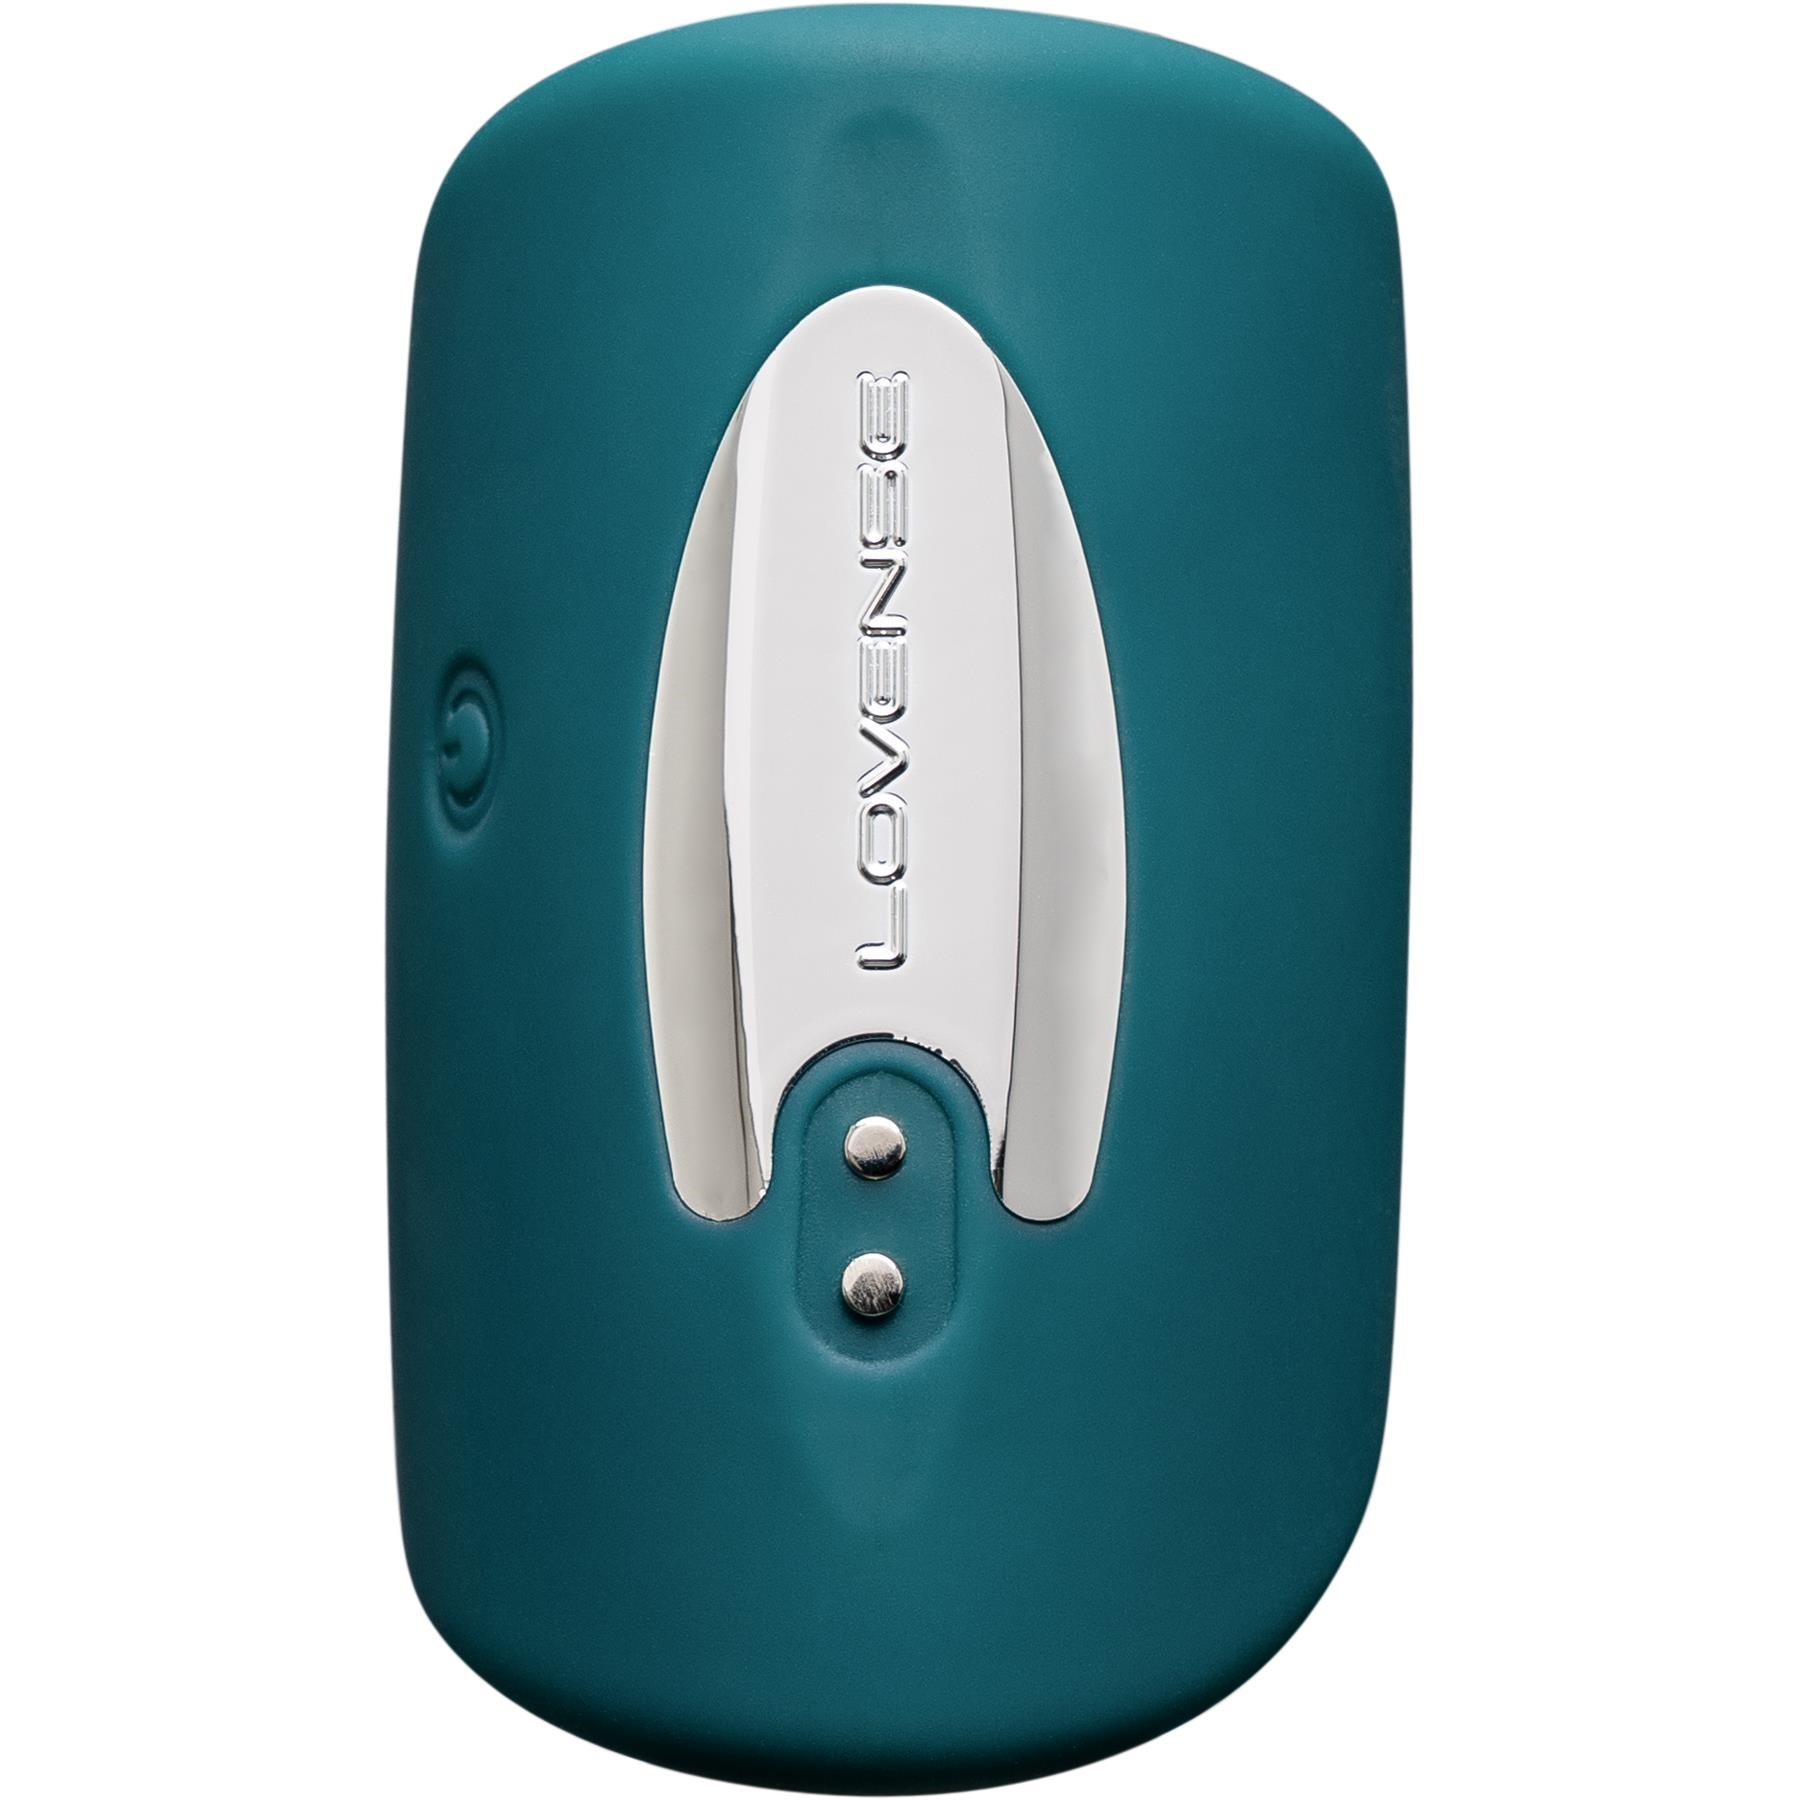 Lovense Gush Bluetooth Glans Massager - Product Shot - Front